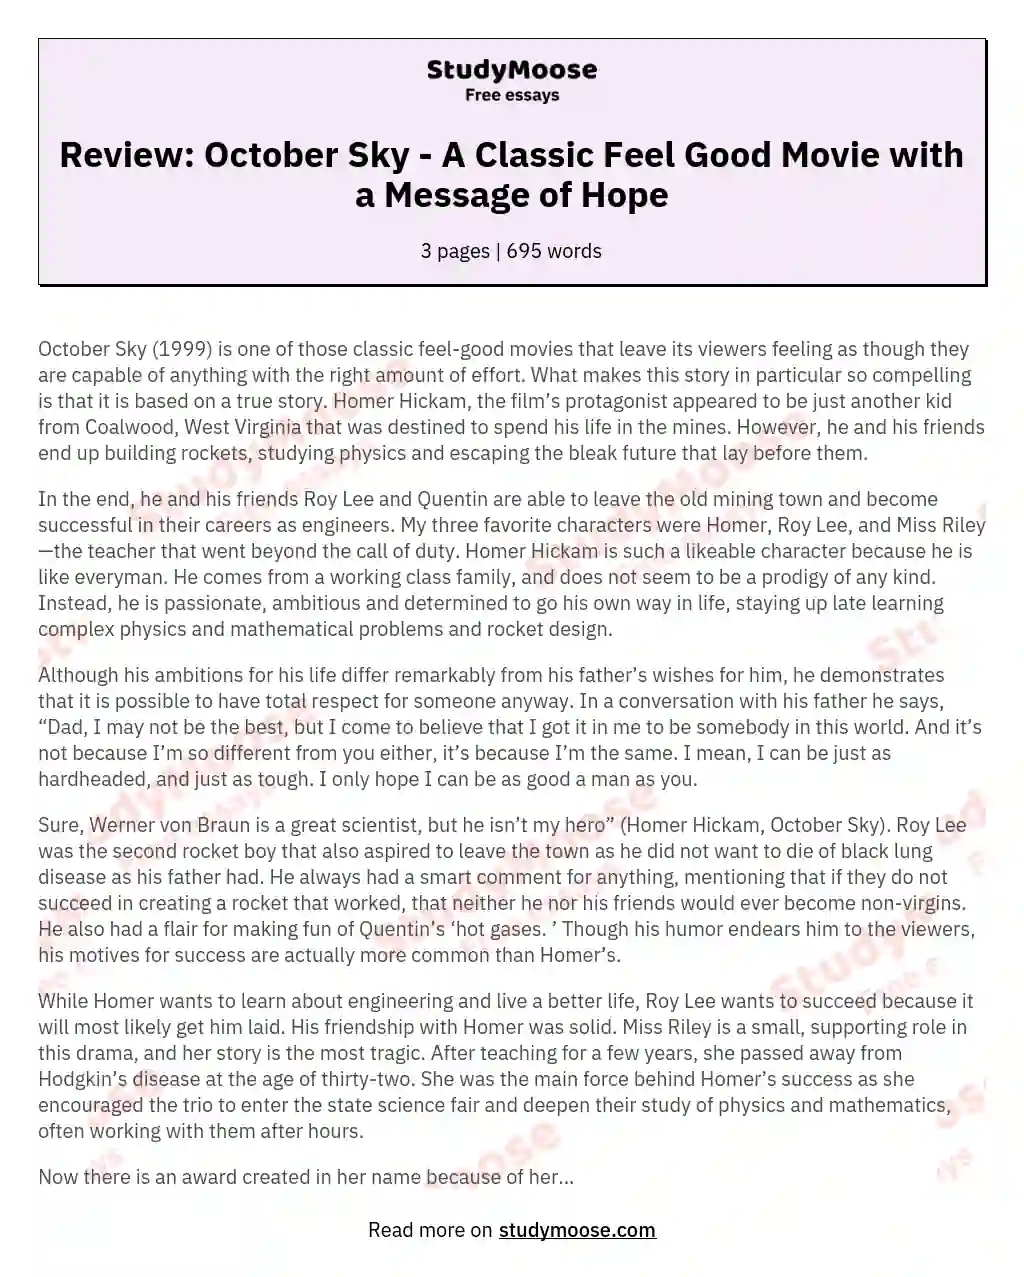 Review: October Sky - A Classic Feel Good Movie with a Message of Hope essay